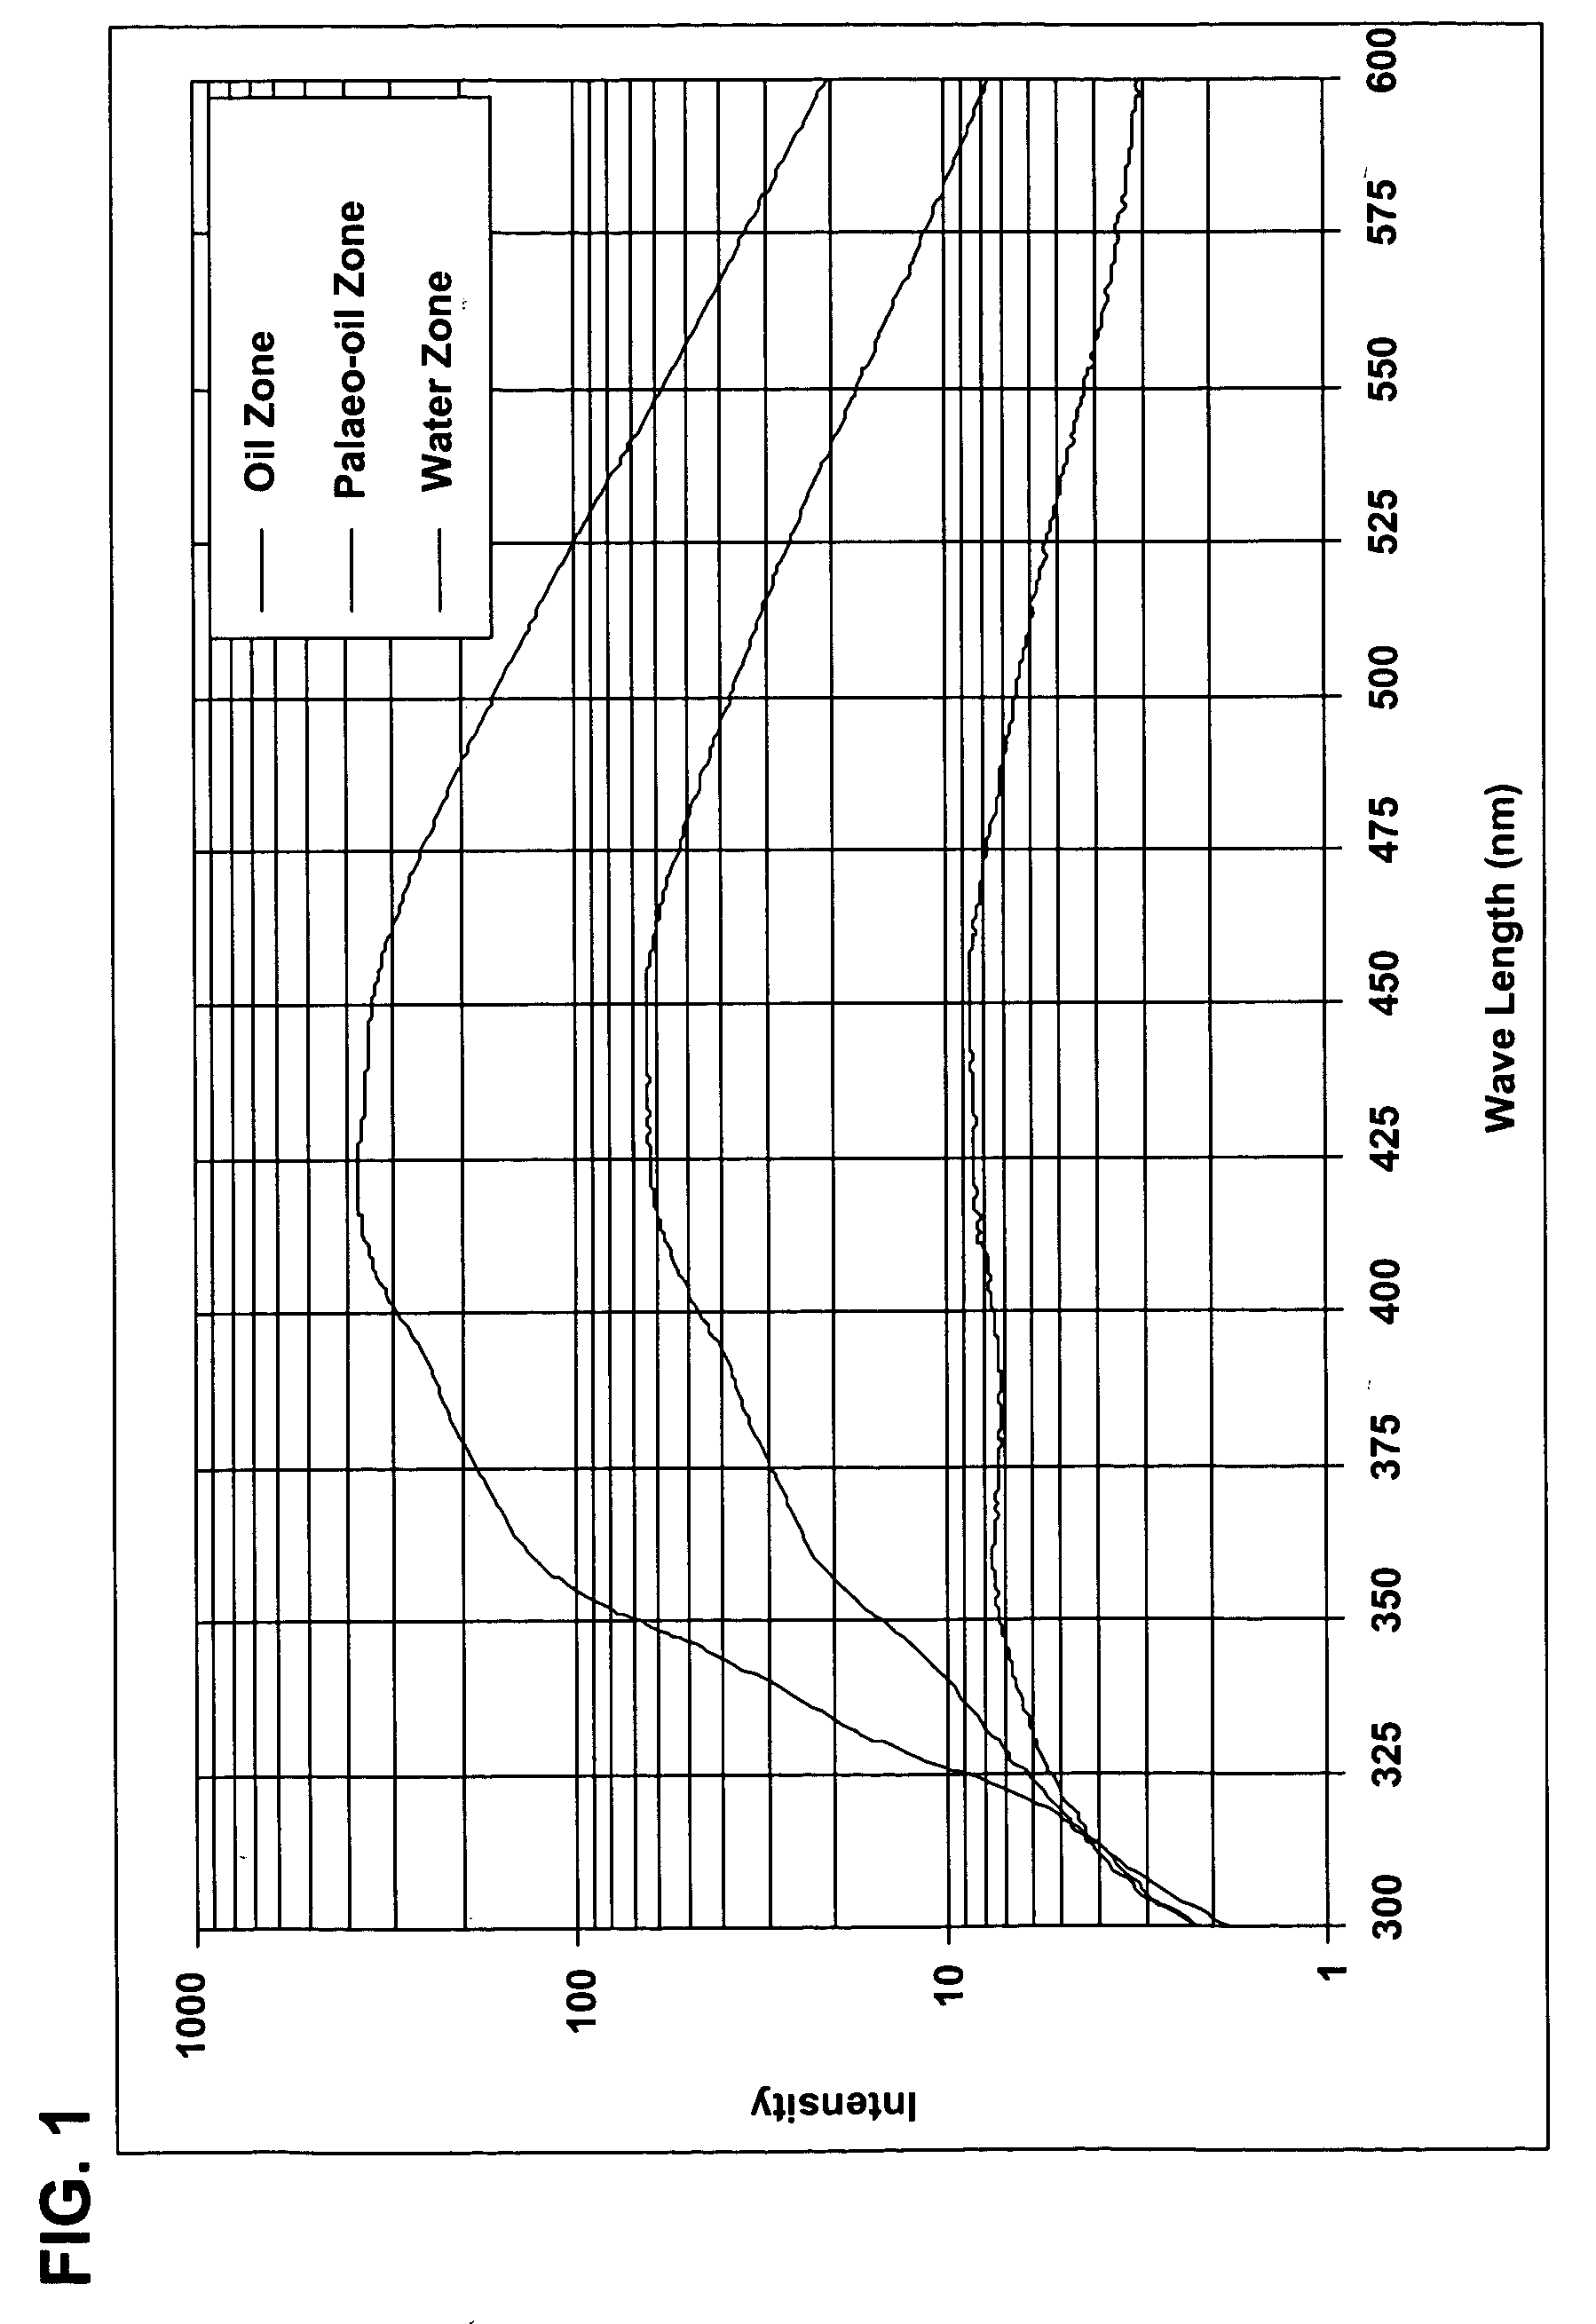 Method for determining whether a rock is capable of functioning as an oil reservoir